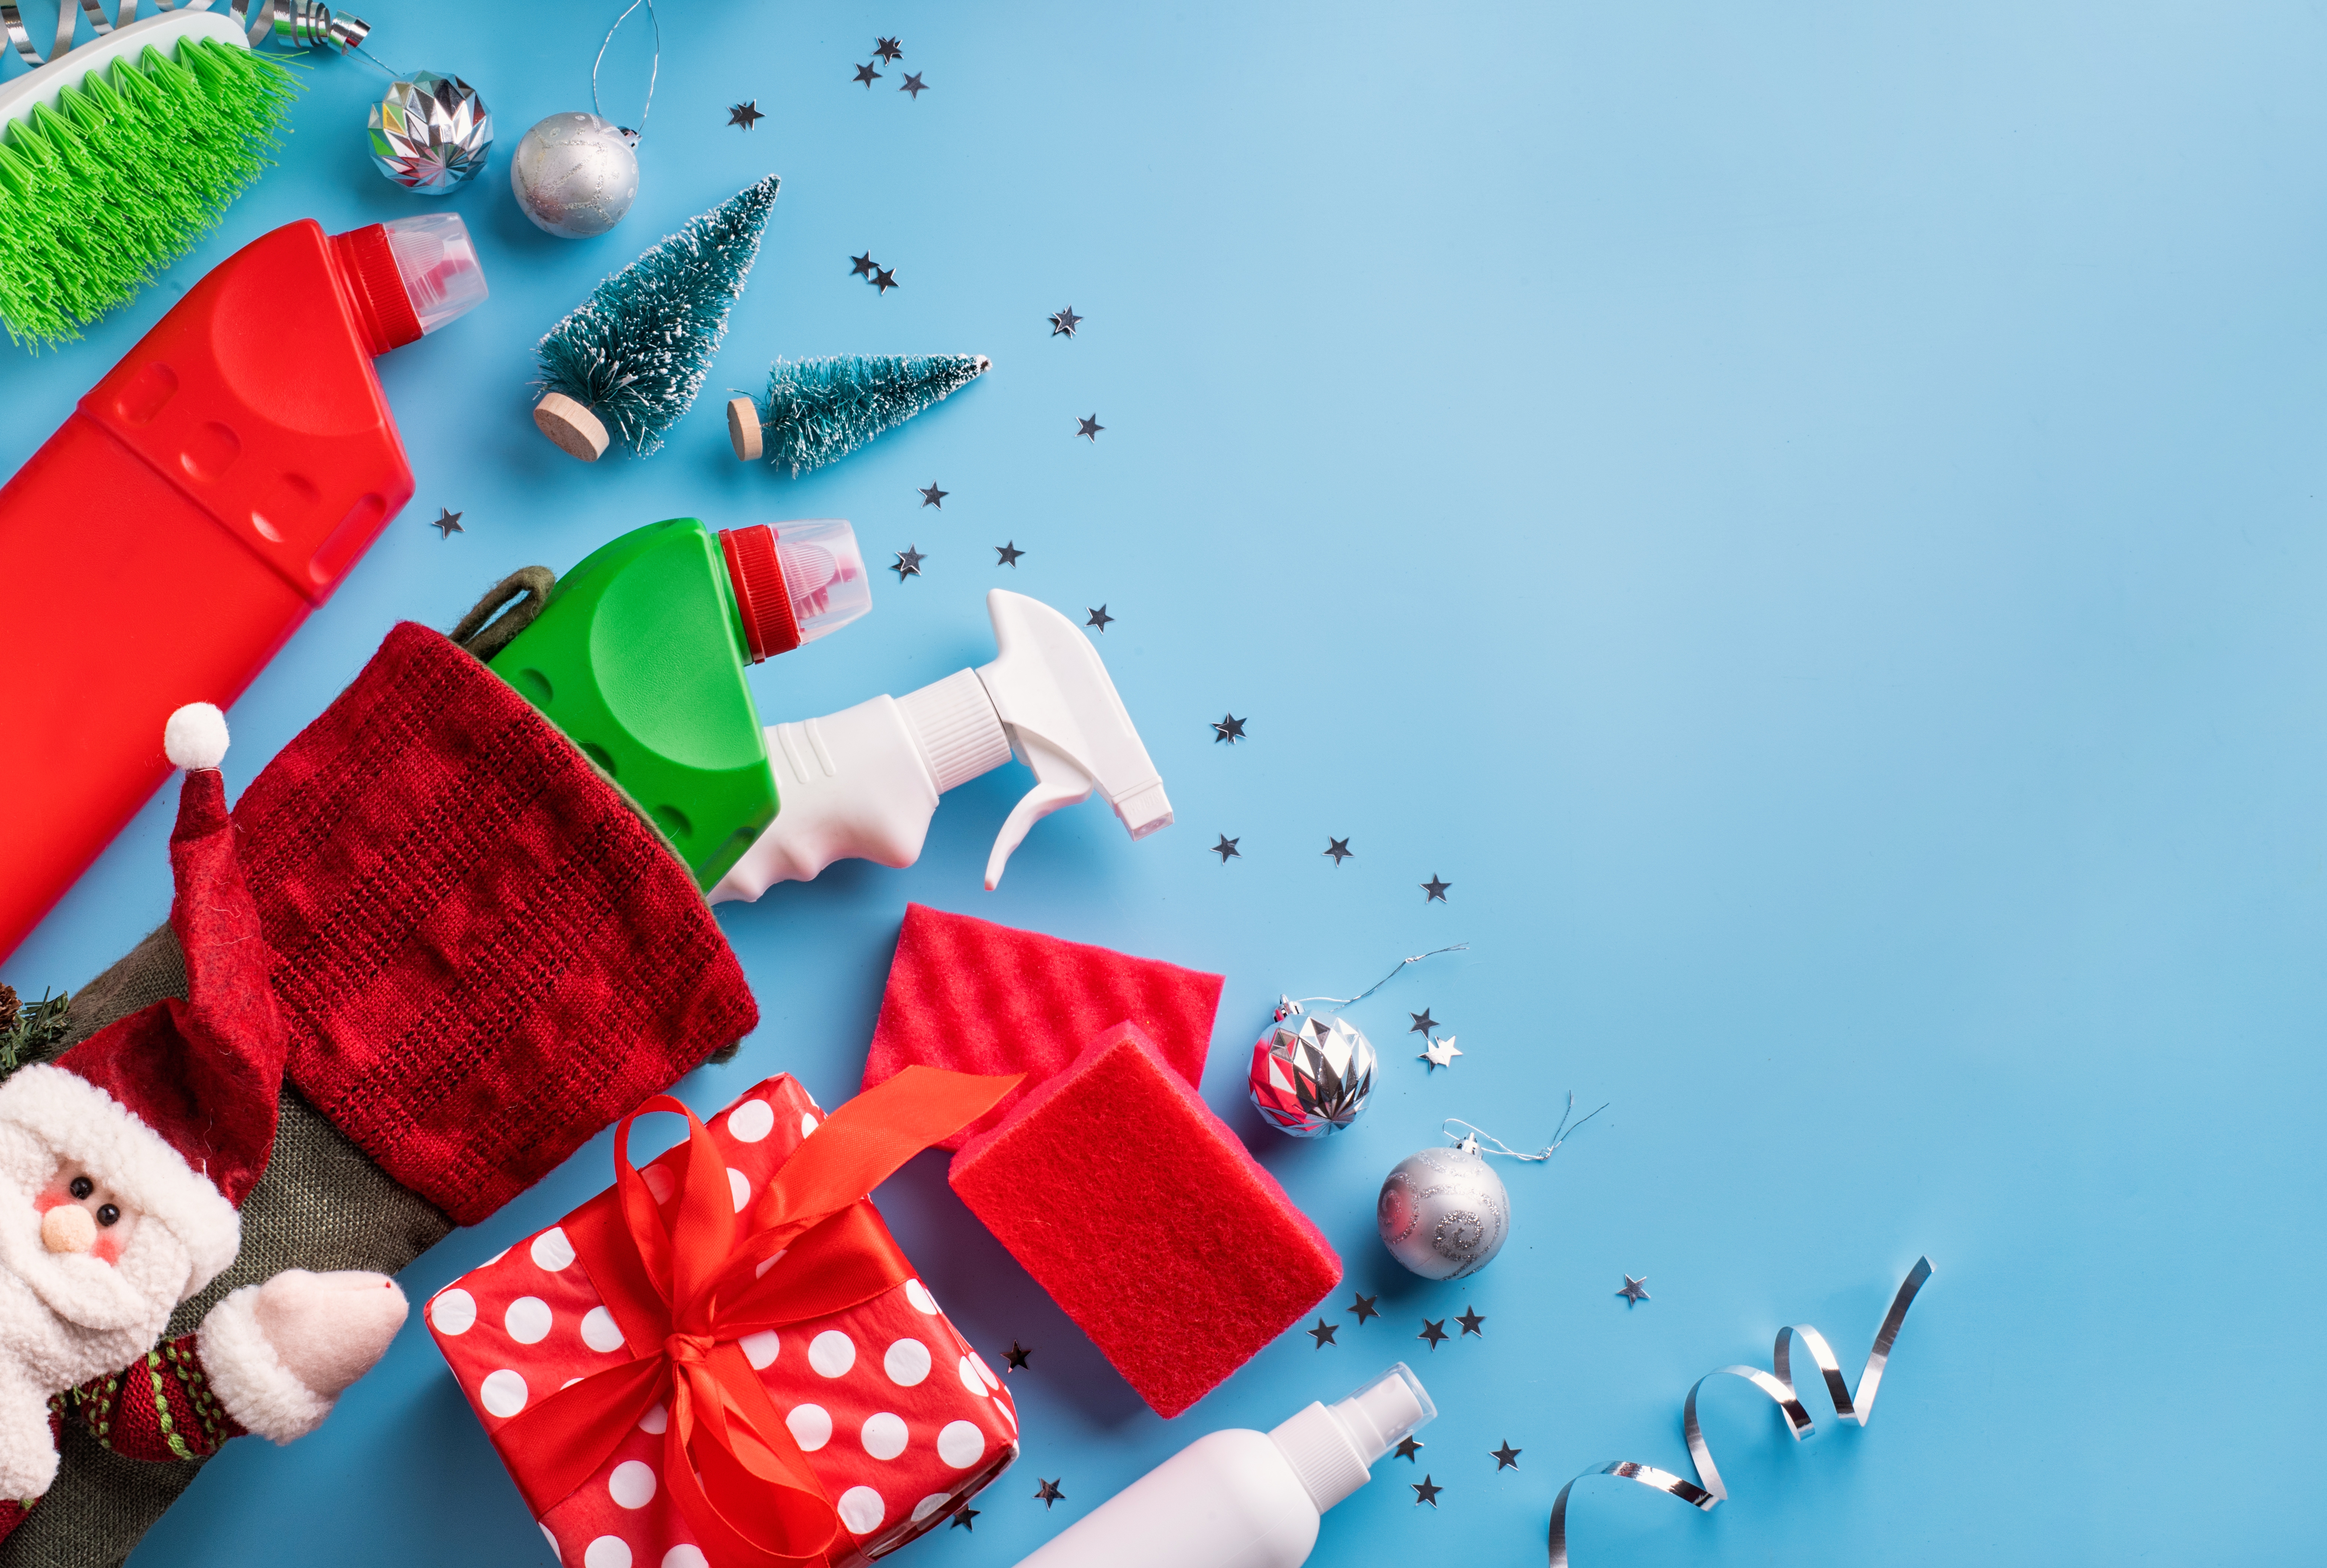 Cleaning-supplies-on-a-blue-background-with-christmas-decorations